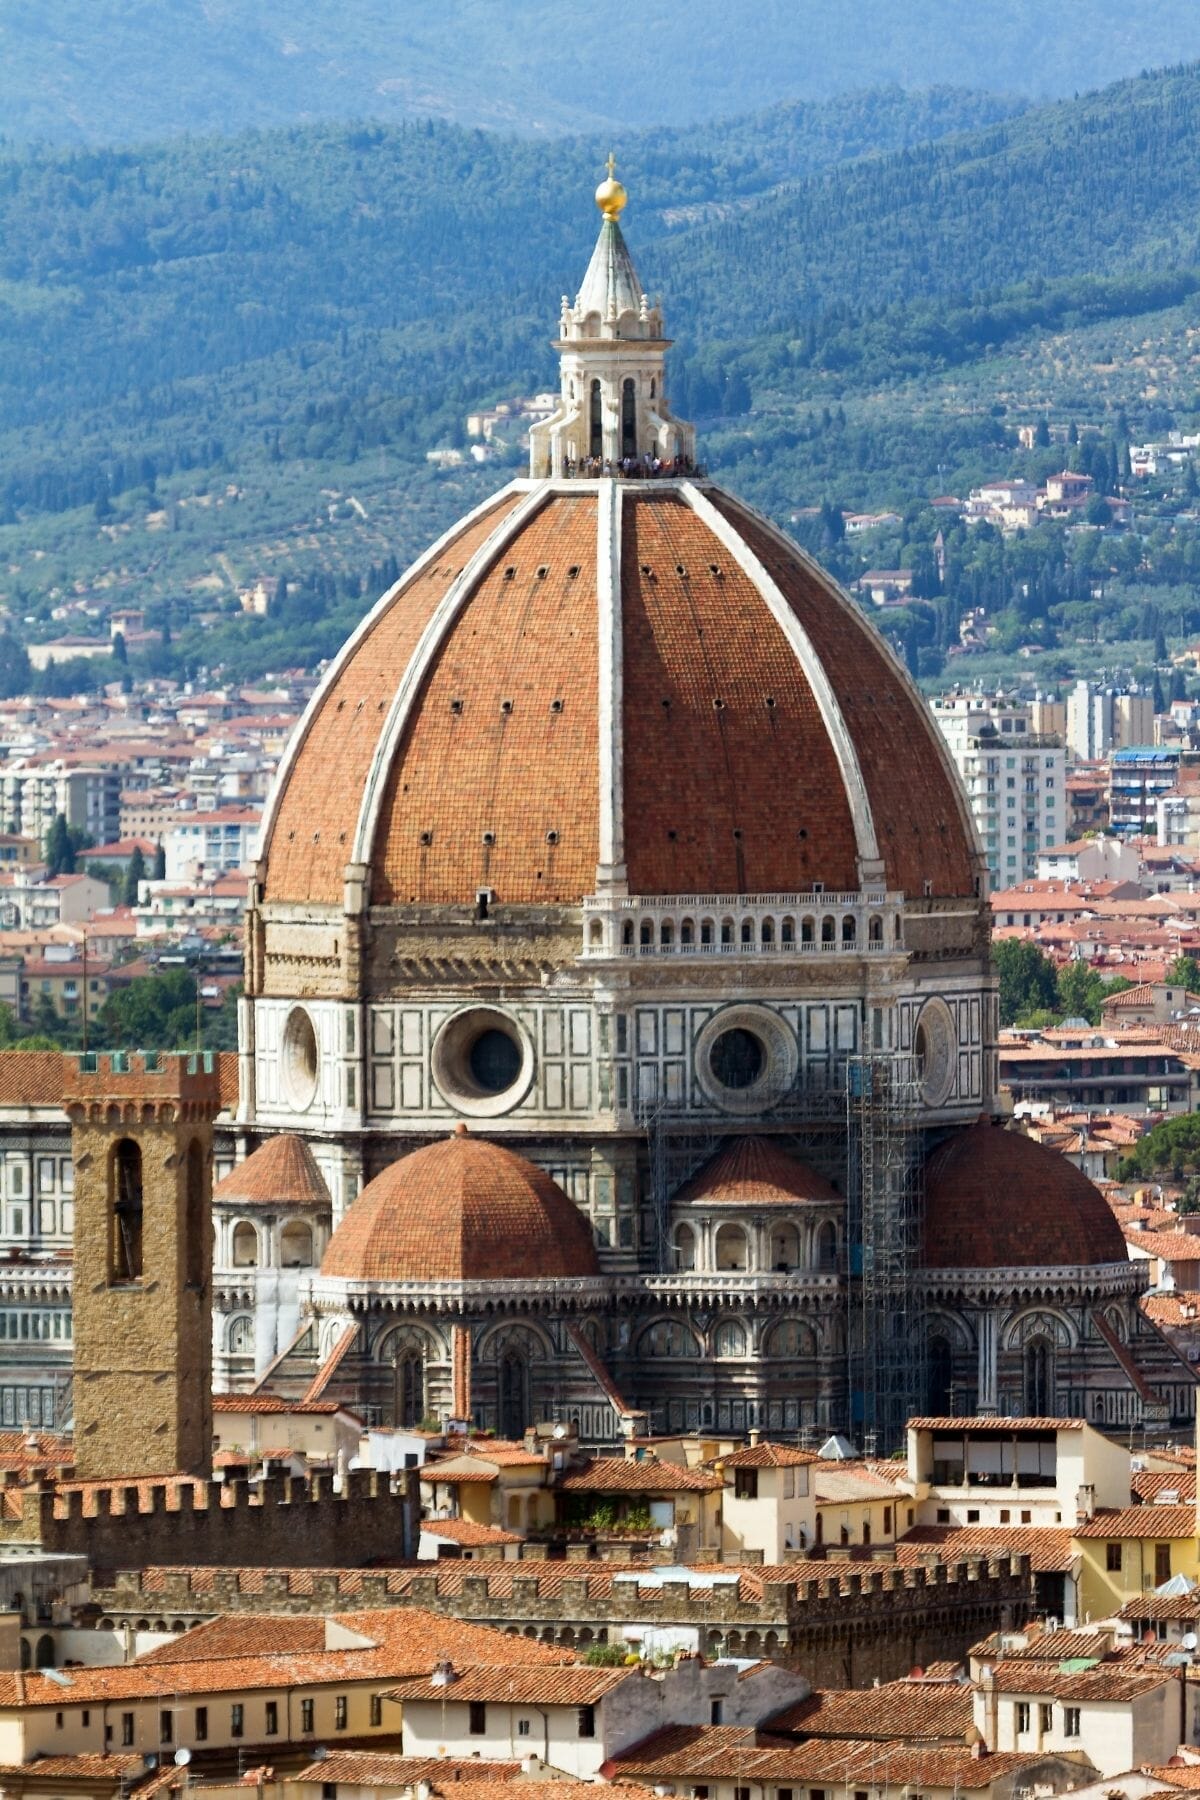 Duomo di Florence, one of the best things to visit in 2 days in Florence